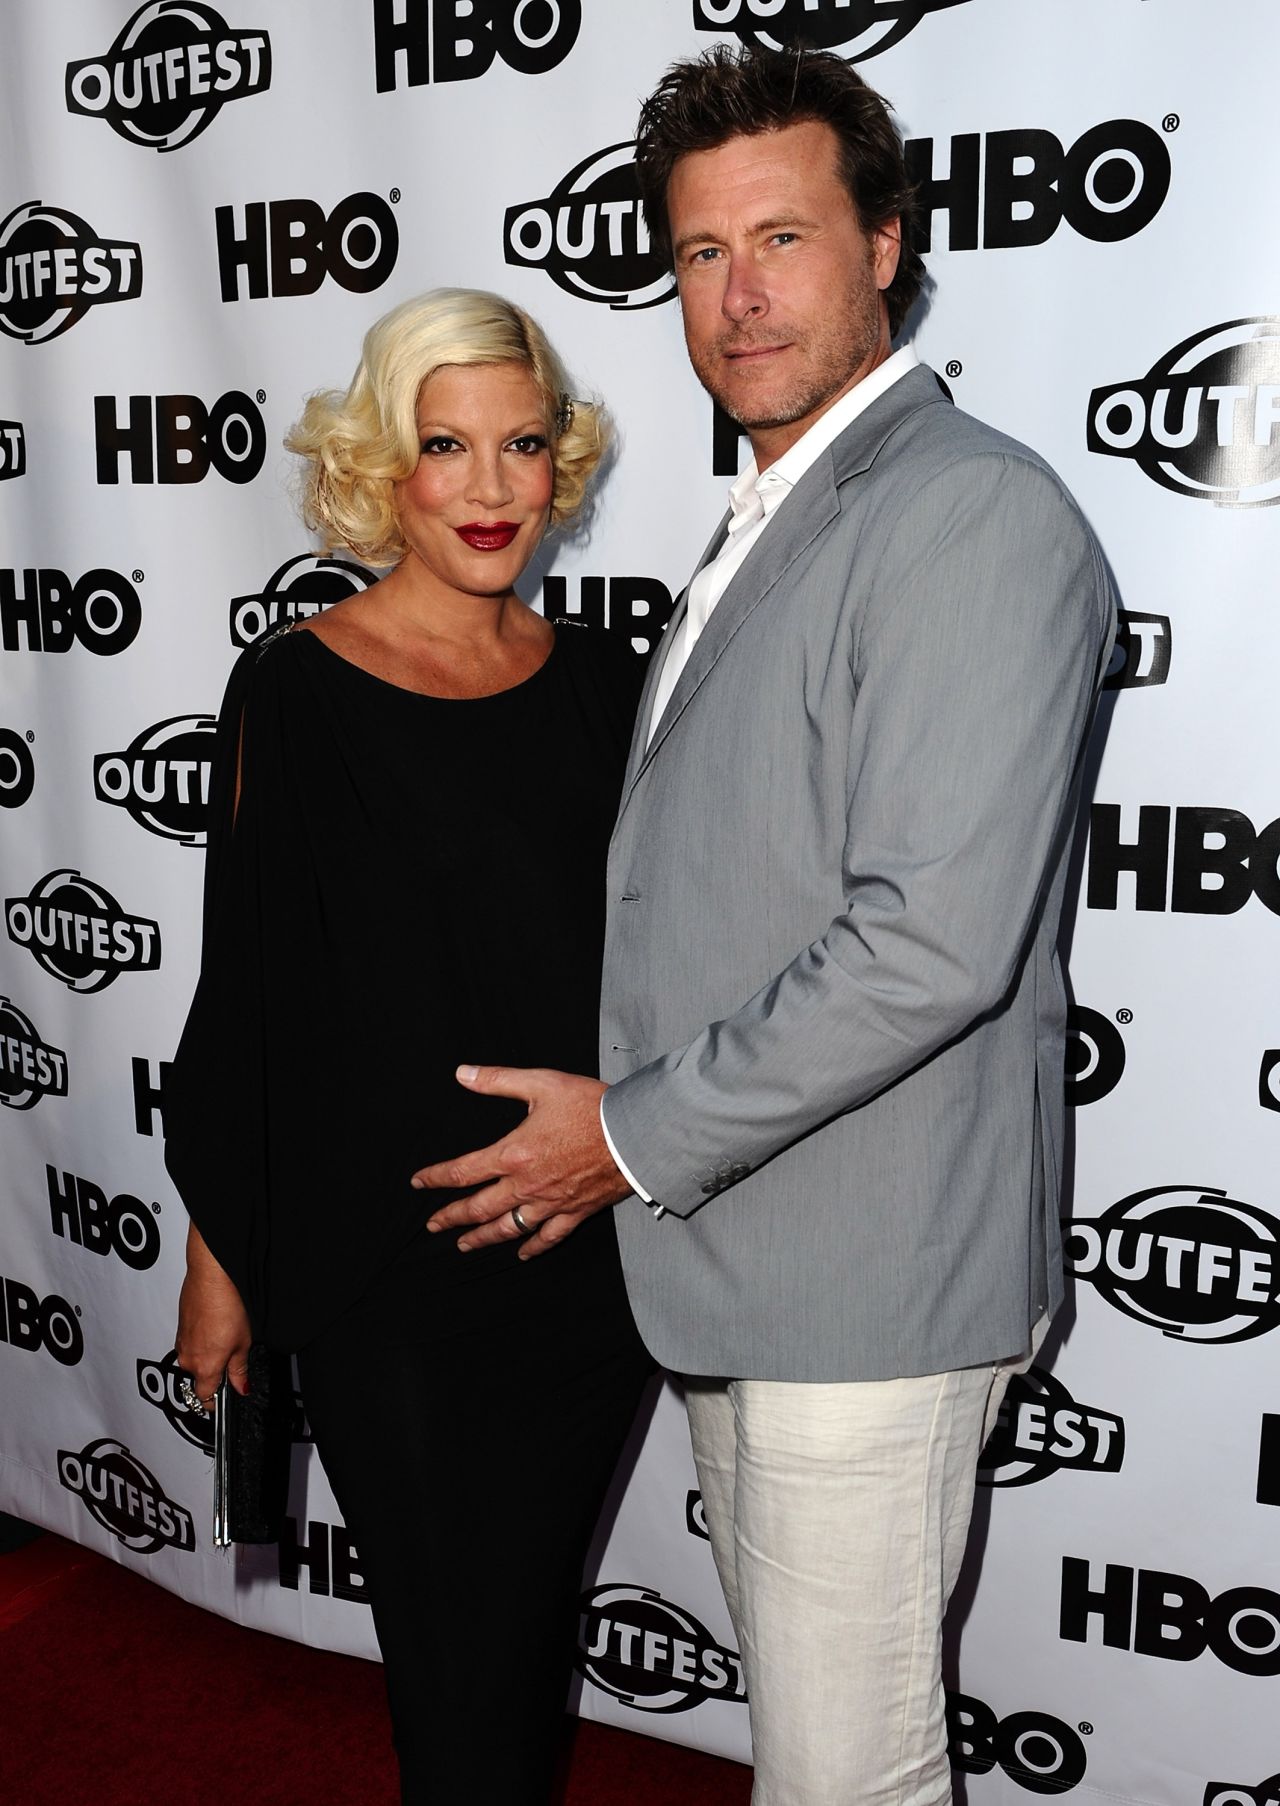 Tori Spelling and Dean McDermott got engaged in 2005 at a Christmas tree farm on Christmas Eve in his native Canada. The pair rode in a horse-drawn carriage down a half-mile road lit up with lights, leading to a table for two surrounded by decorated Christmas trees. 